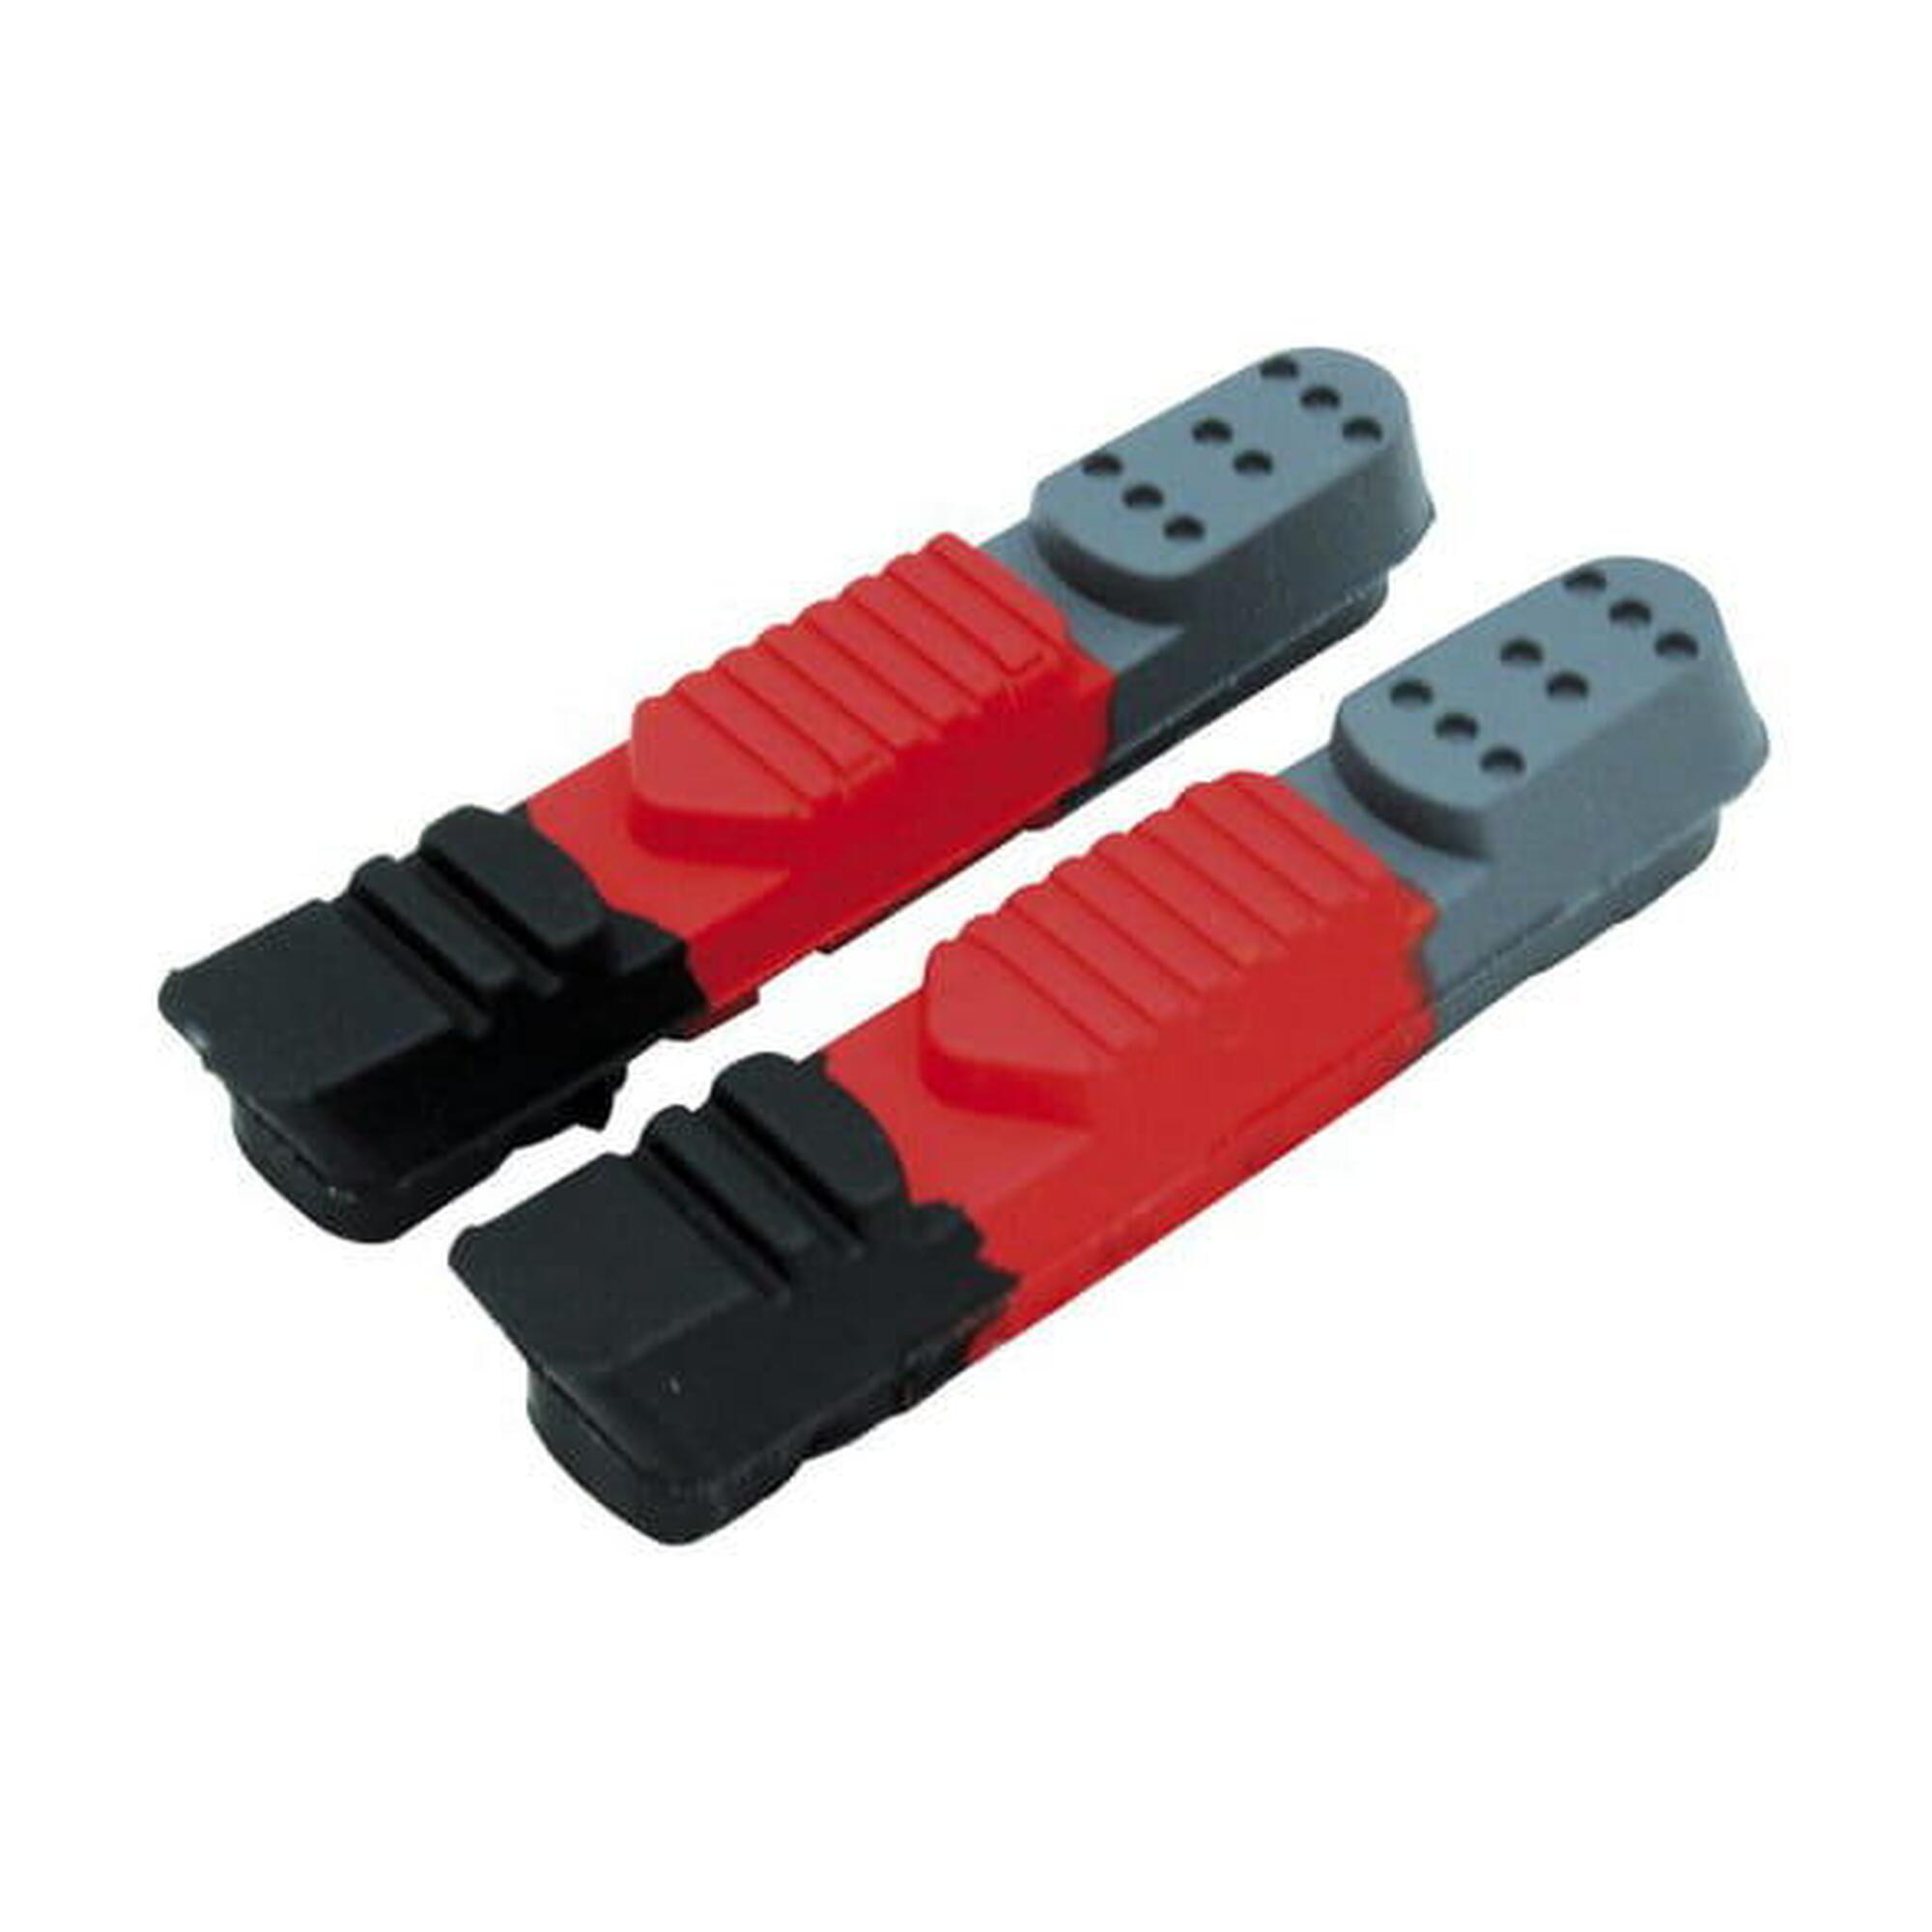 CLARKS CYCLE SYTEMS Clarks Elite CPS220 Brake pad inserts